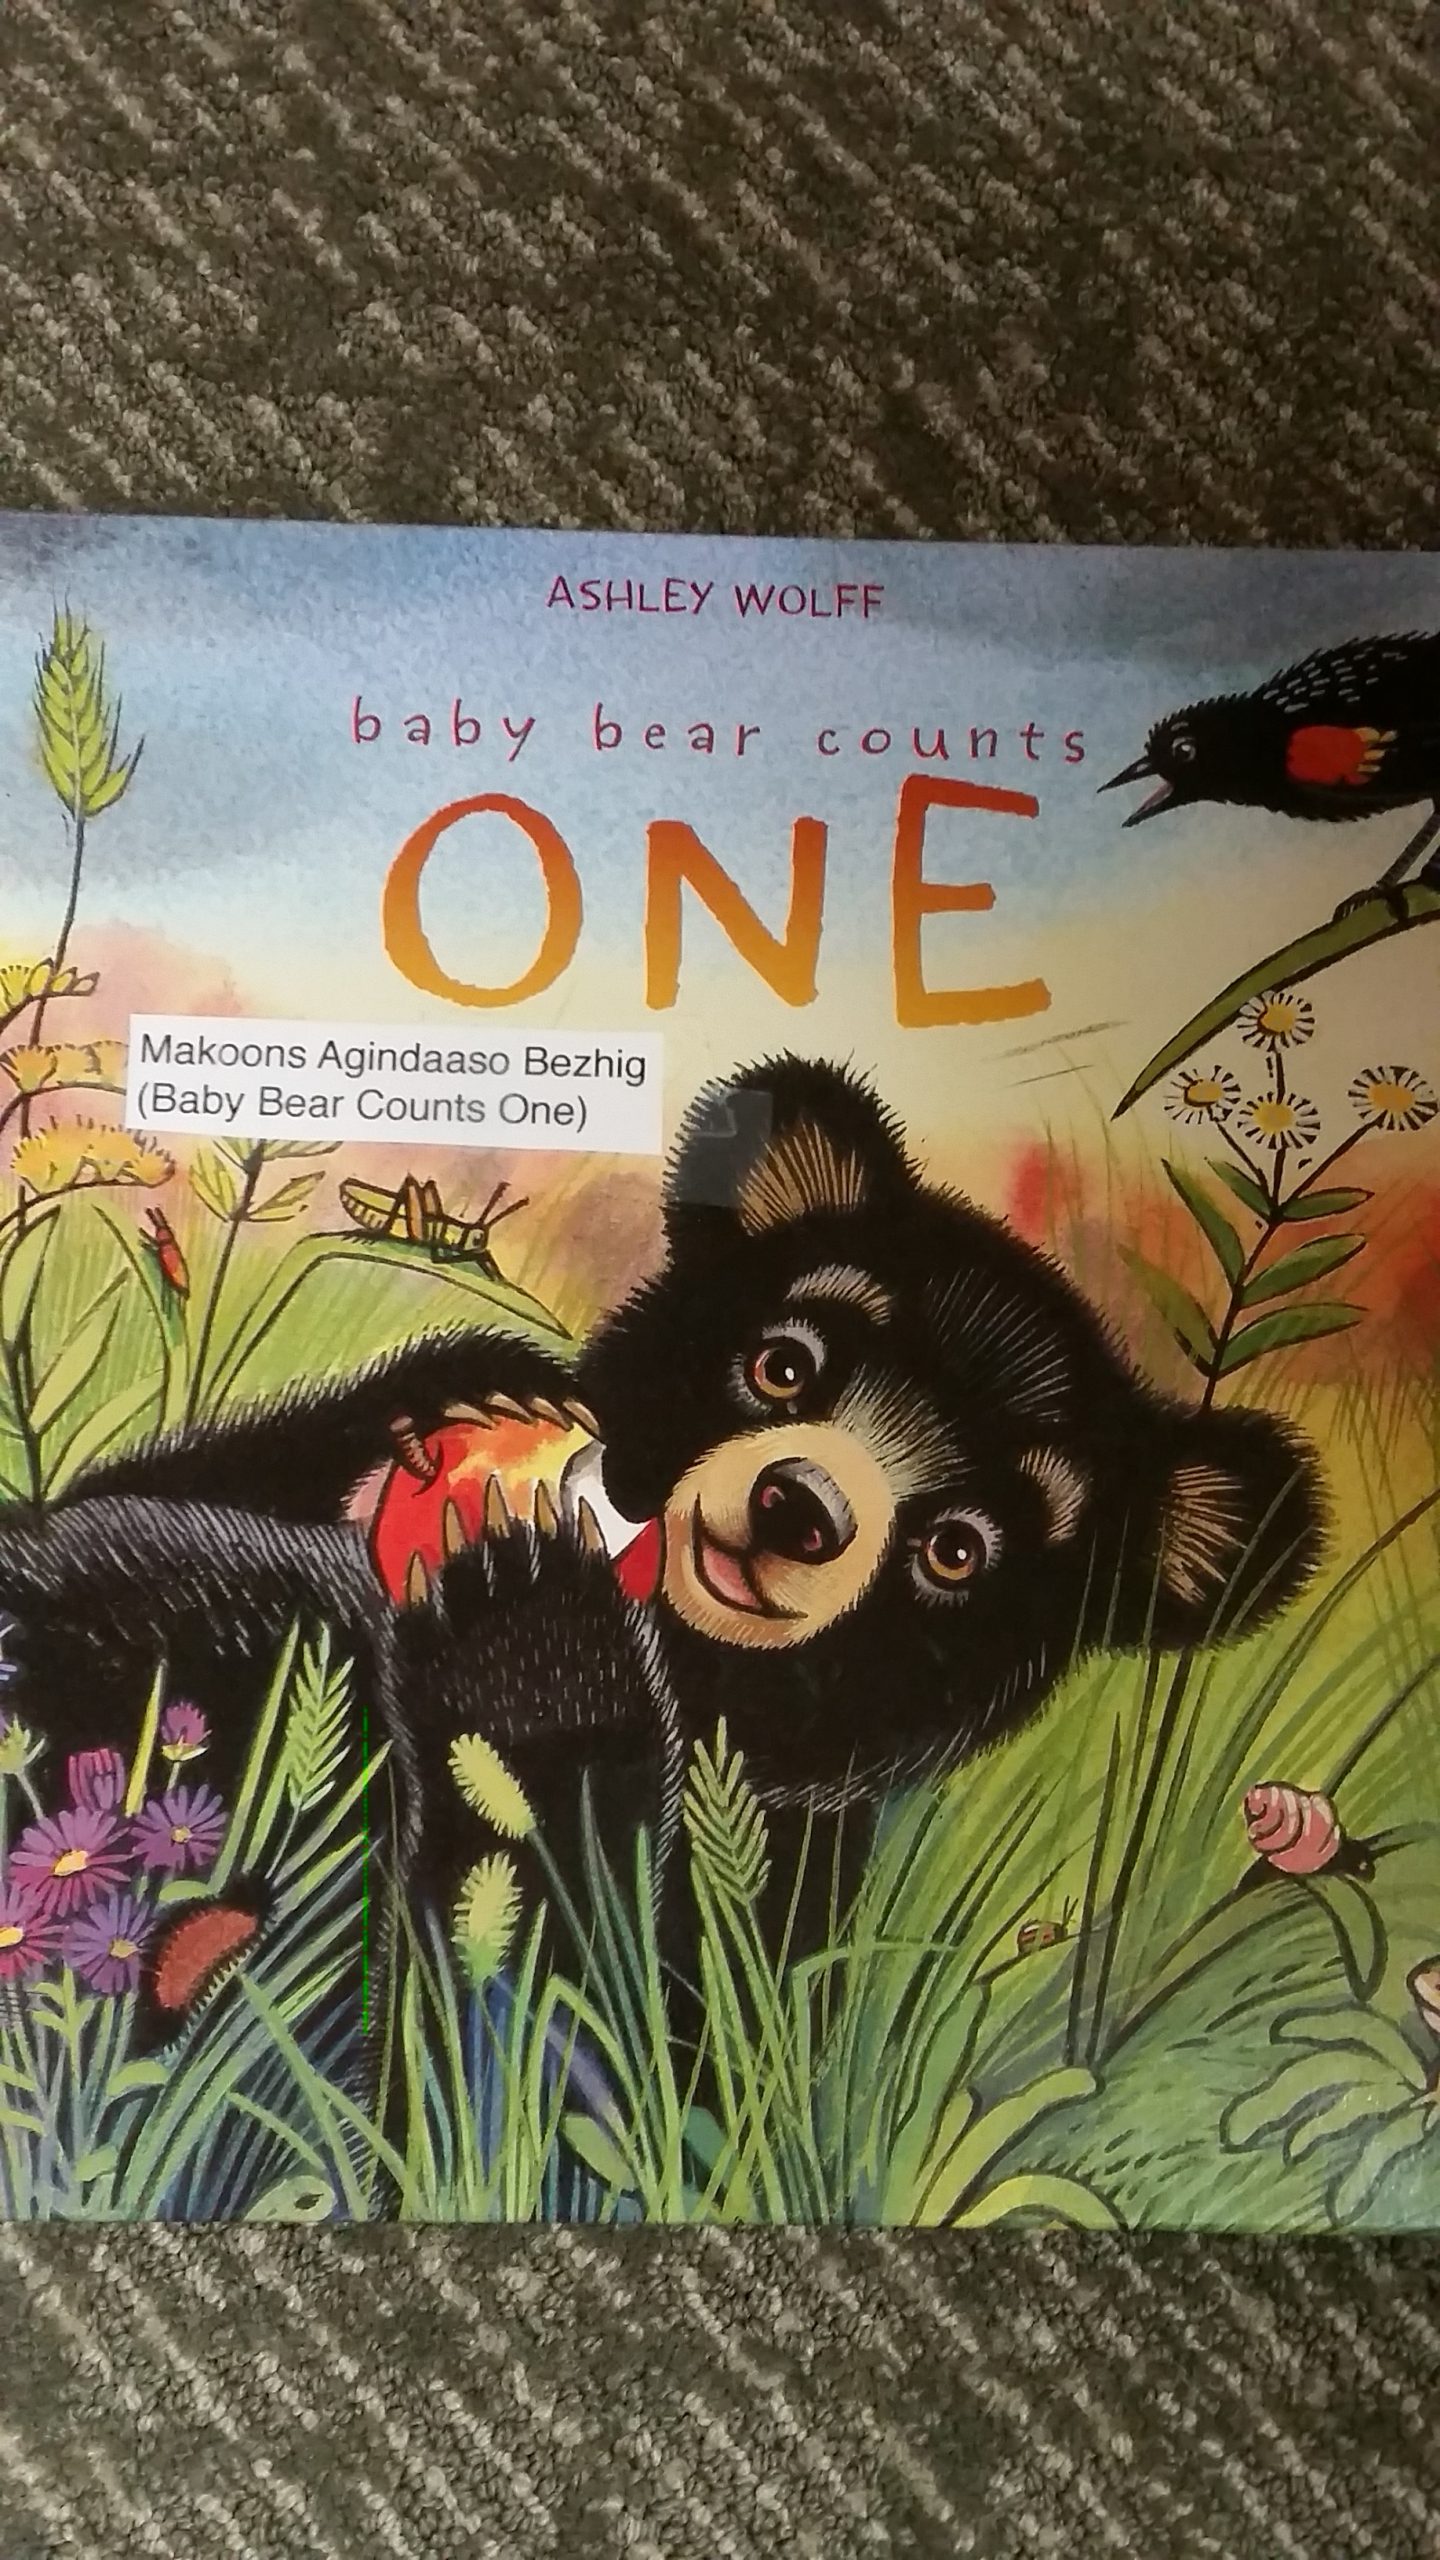 Baby Bear Counts One by Ashley Wolff (2013)